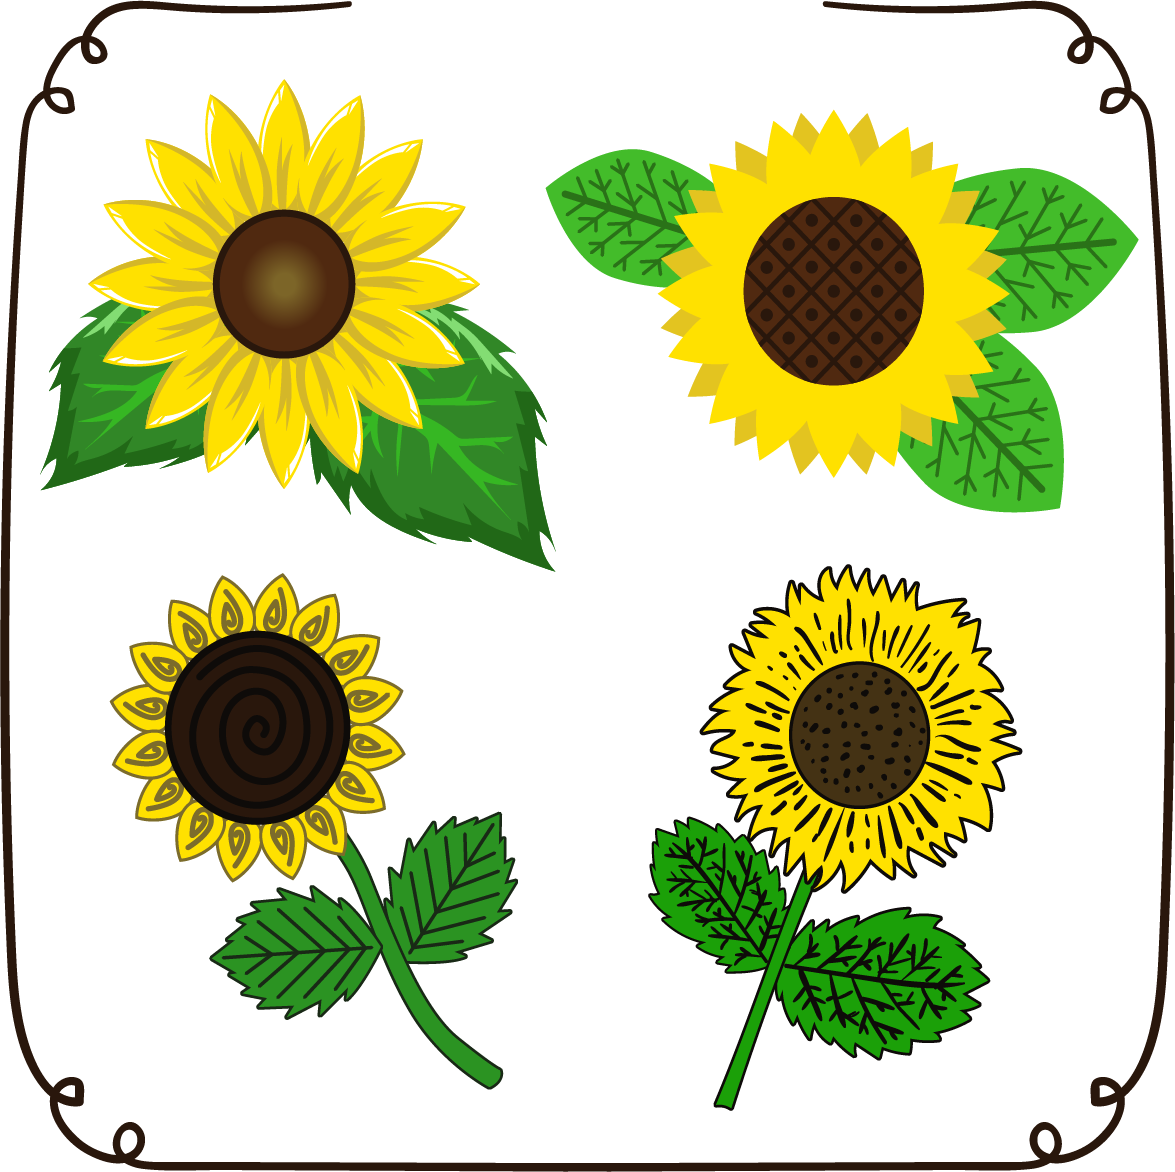 Common Sunflower Euclidean Vector Drawing Download - Common Sunflower Euclidean Vector Drawing Download (1175x1172)